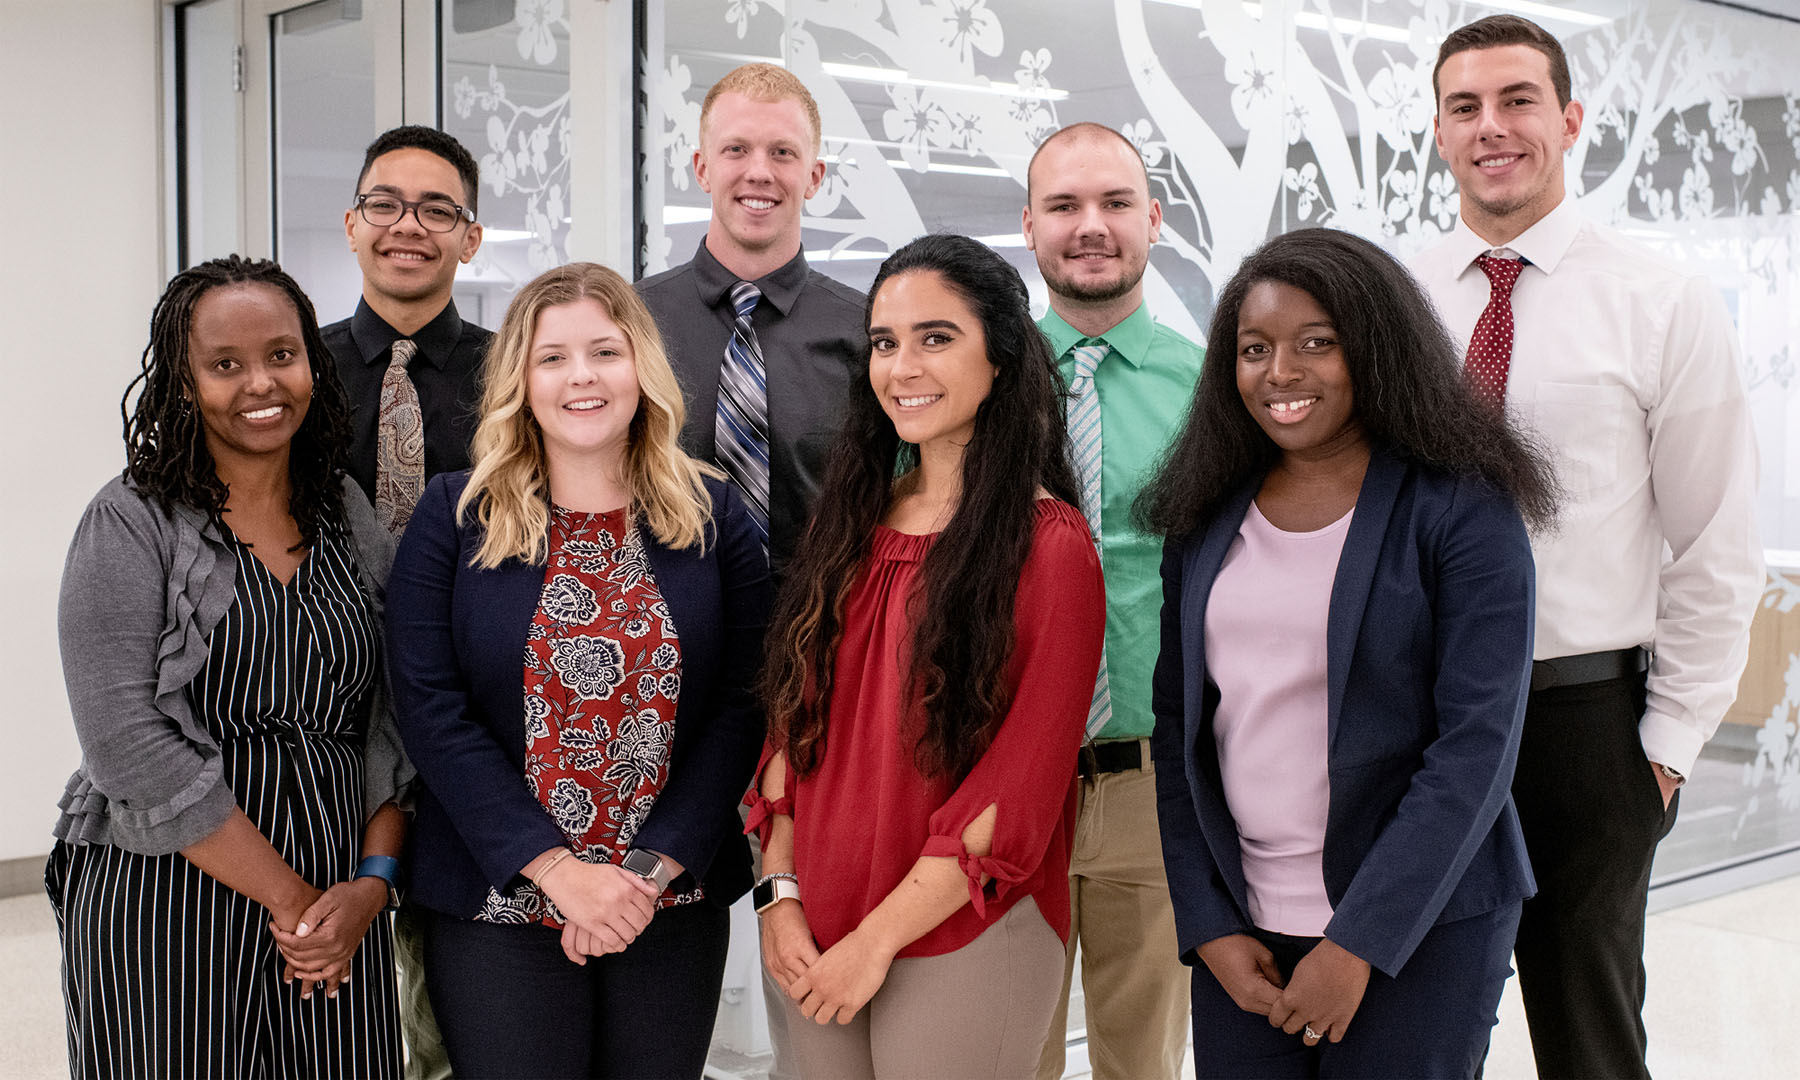 The first cohort of eight students to complete the Heritage College of Osteopathic Medicine’s Transformative Care Continuum graduated in May 2021